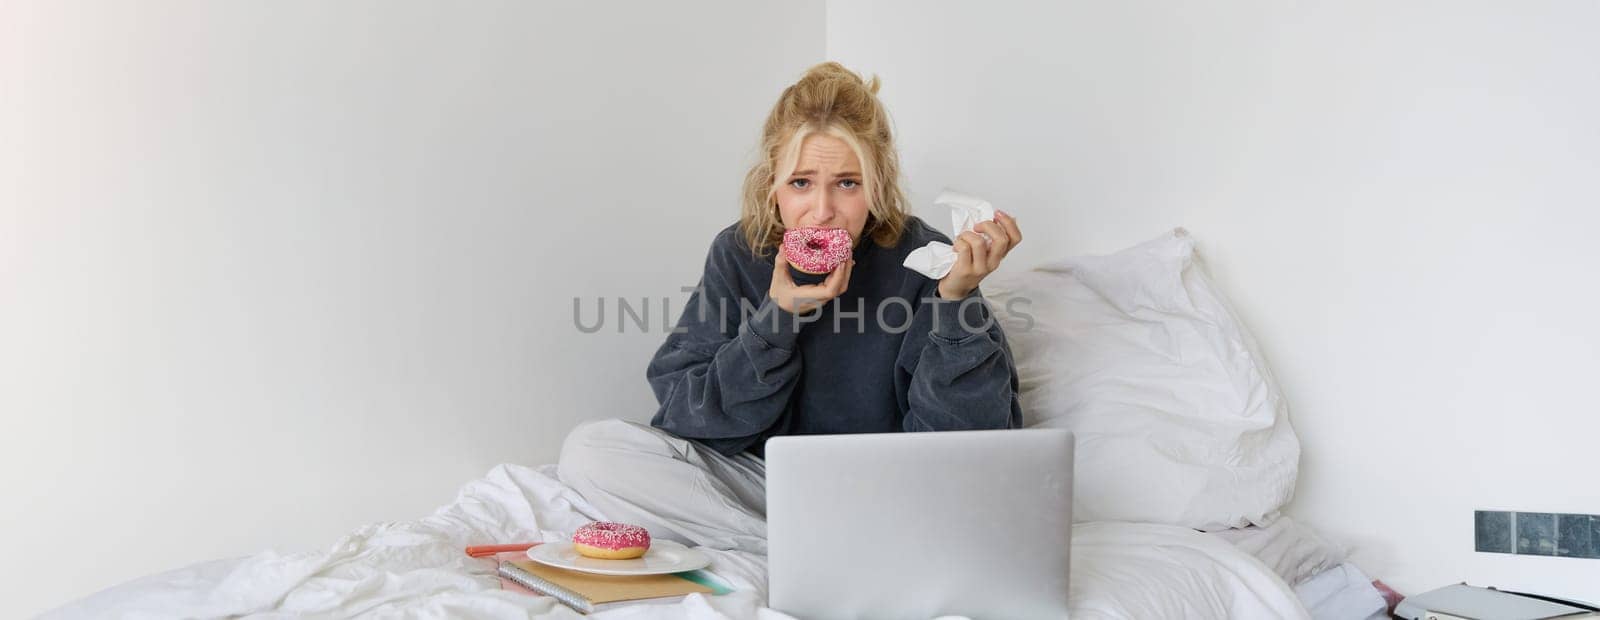 Portrait of sad woman crying, eating doughnut, wiping tears off, looking at something upsetting on laptop screen, sitting on a bed by Benzoix